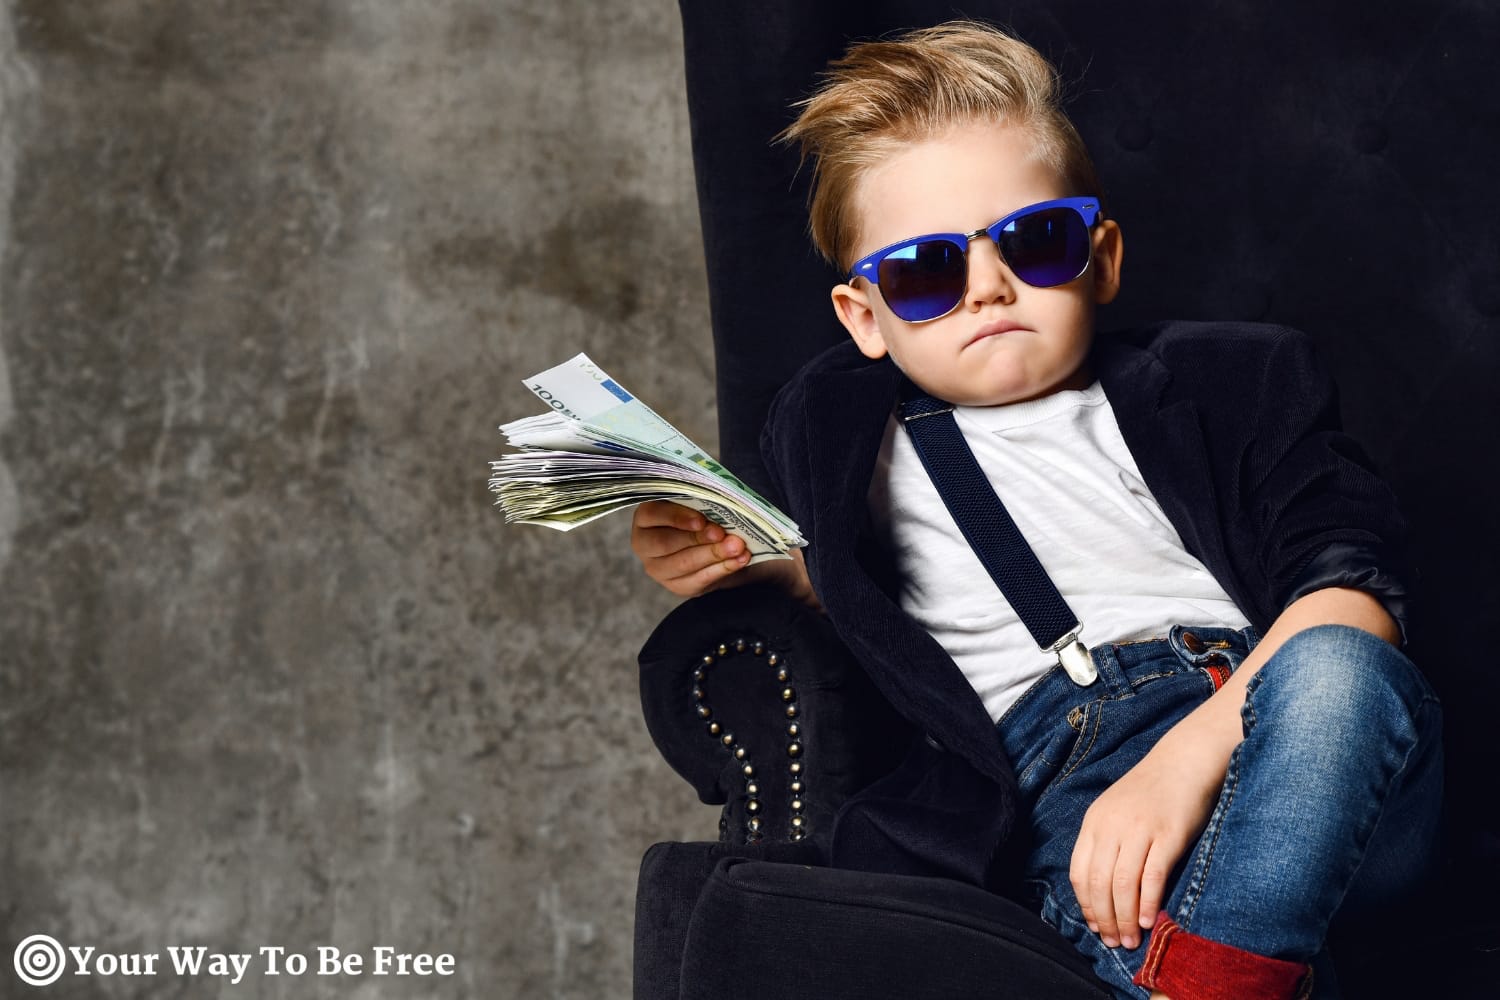 A kid in a black suit with sunglasses and money in his hand, representing 8 Easy And Realistic Ways To Increase Your Income